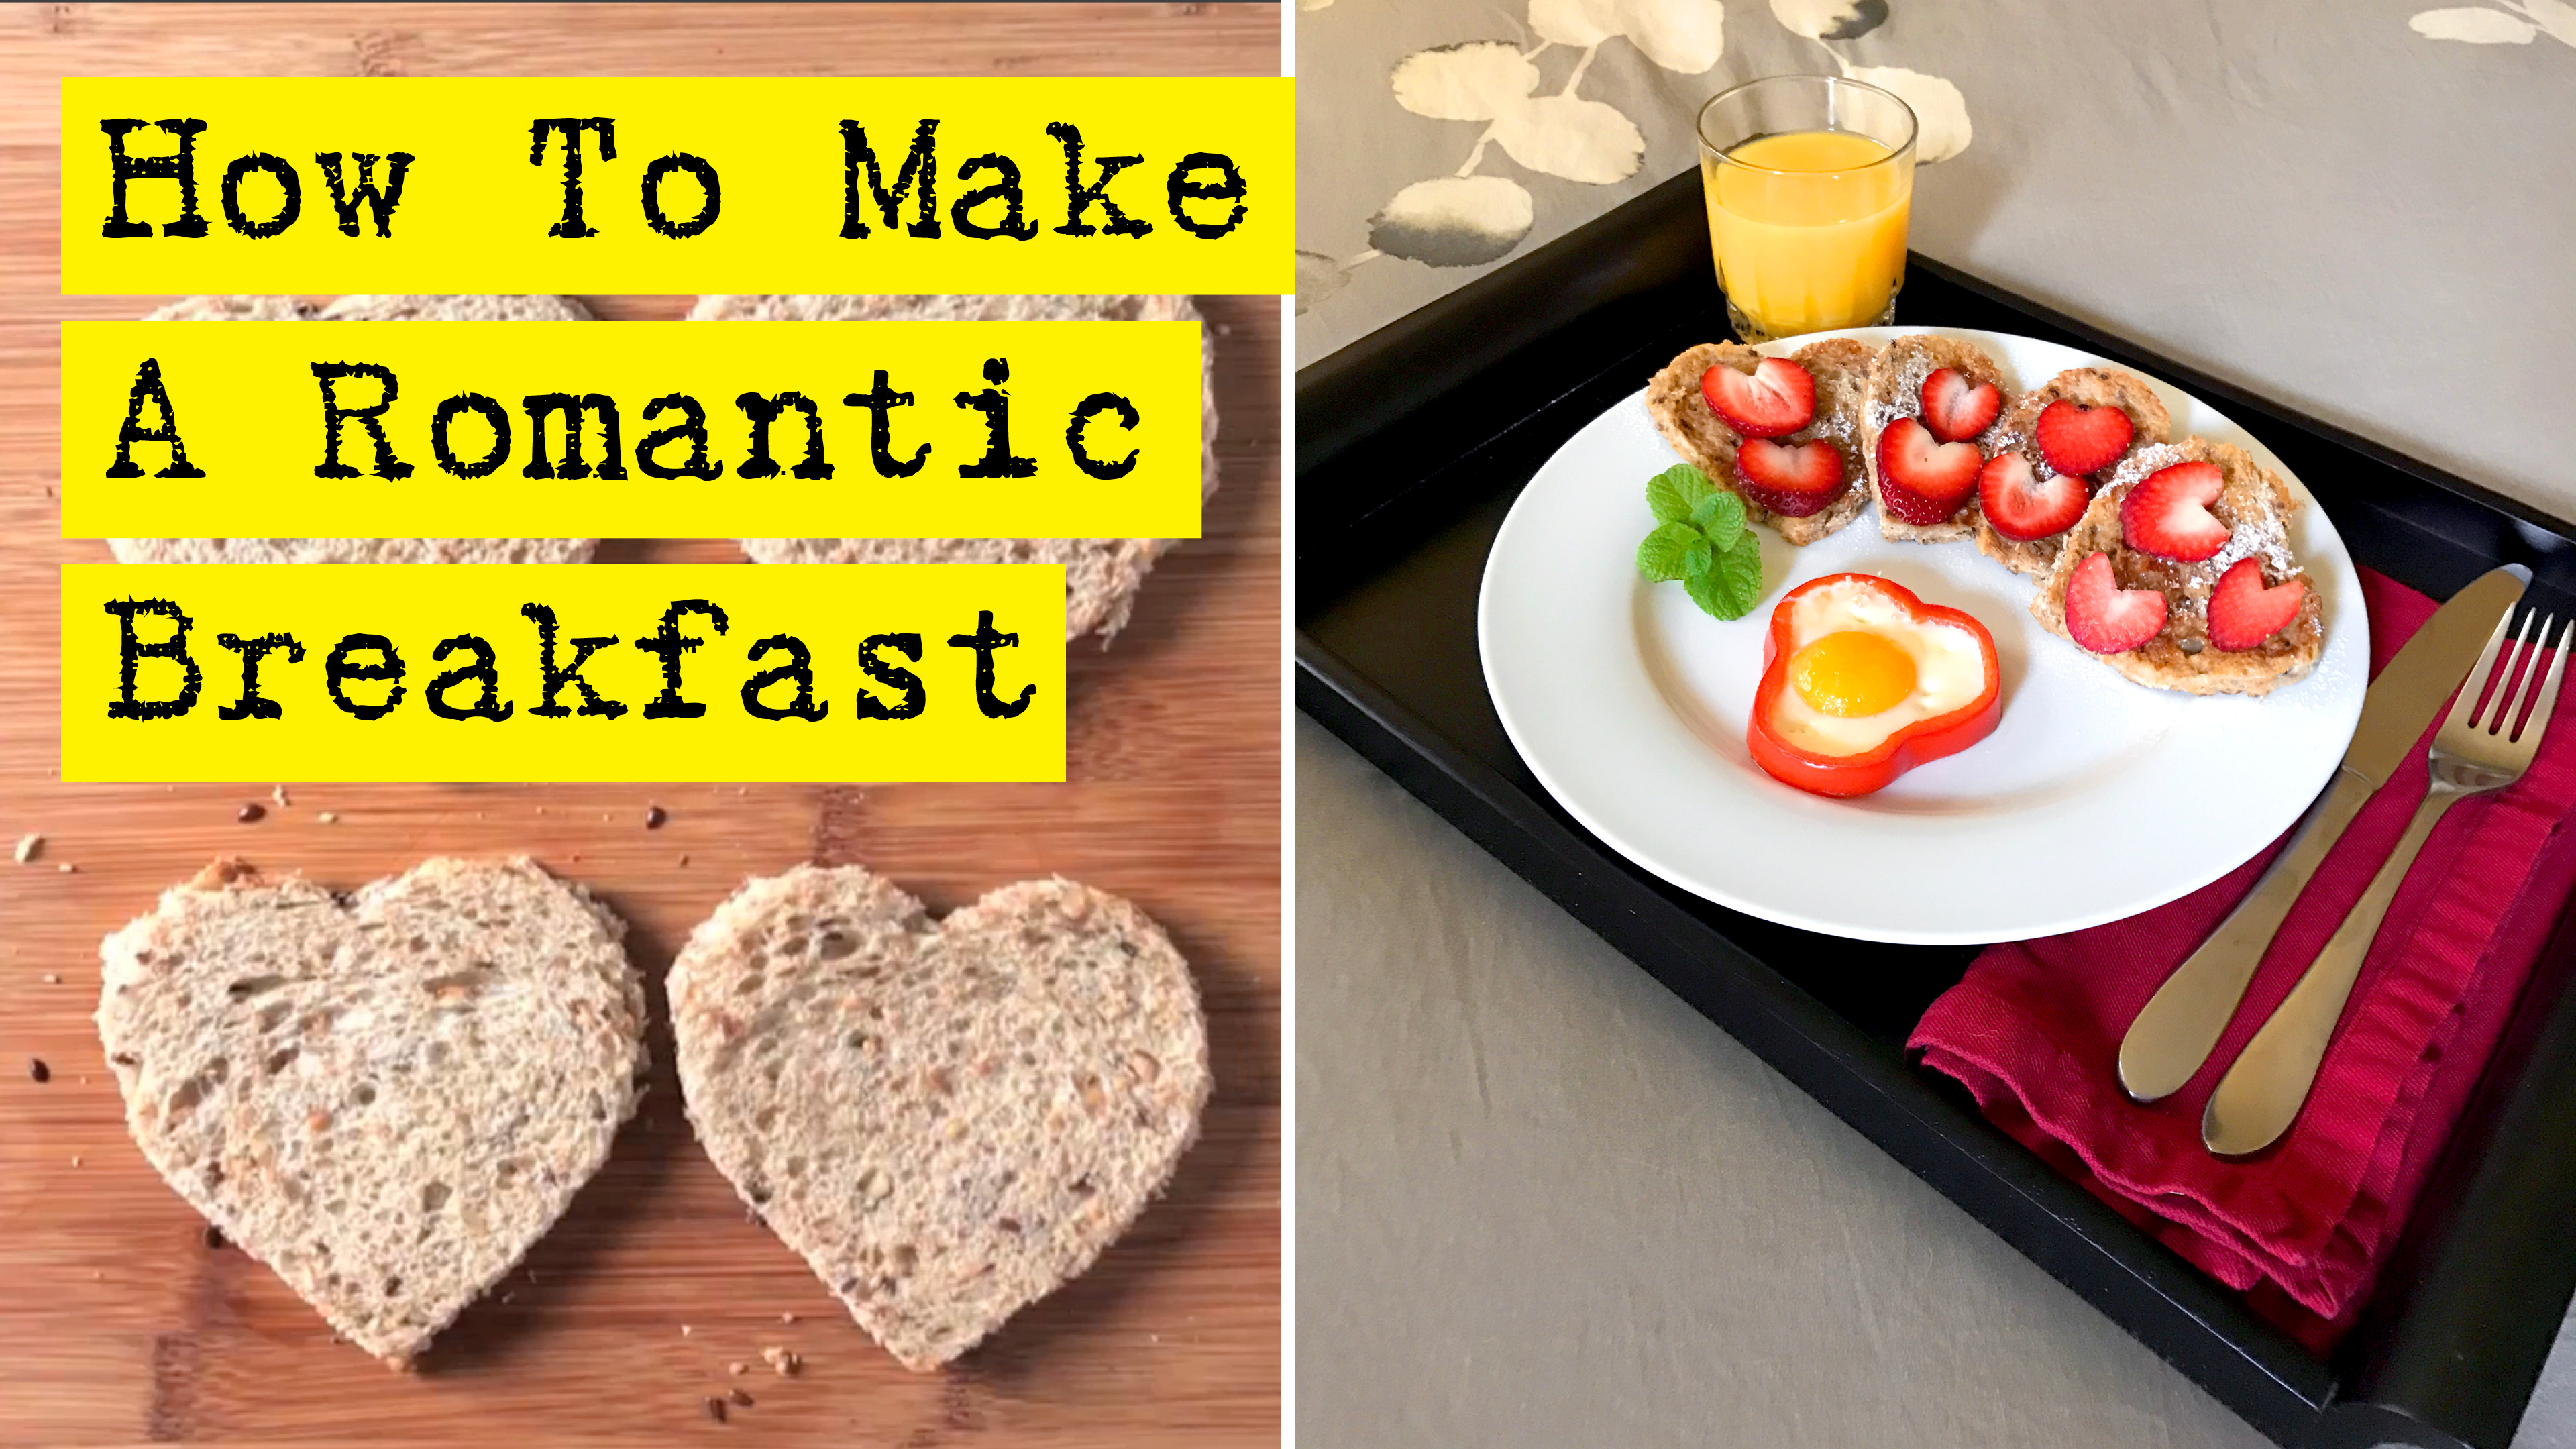 How To Make A Romantic Breakfast